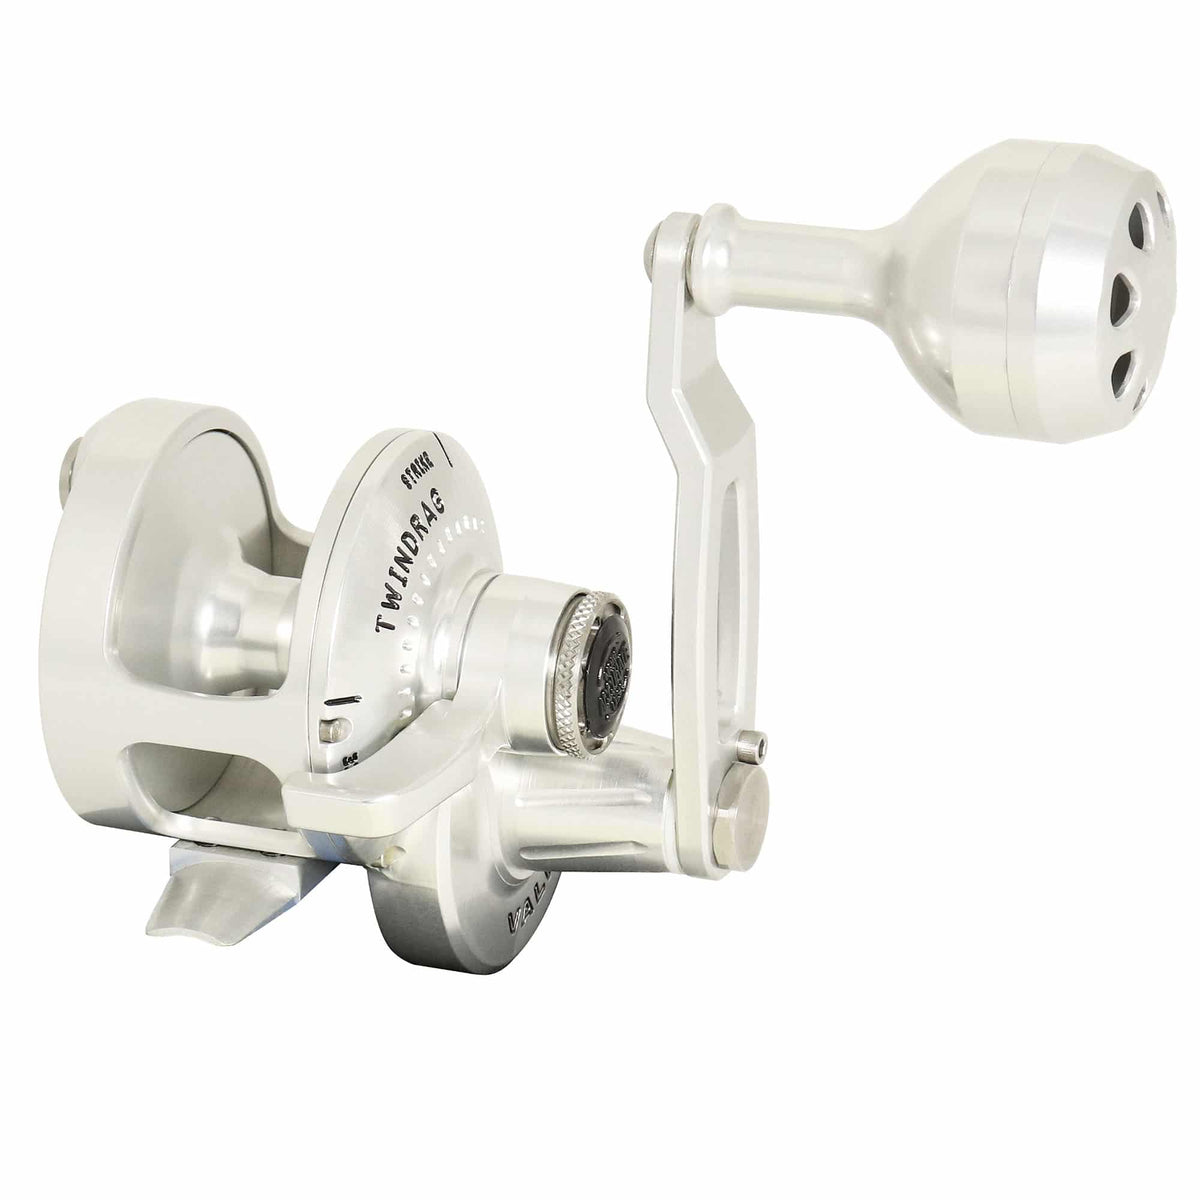 Accurate Boss Valiant Conventional Reels BV-300 (Silver)